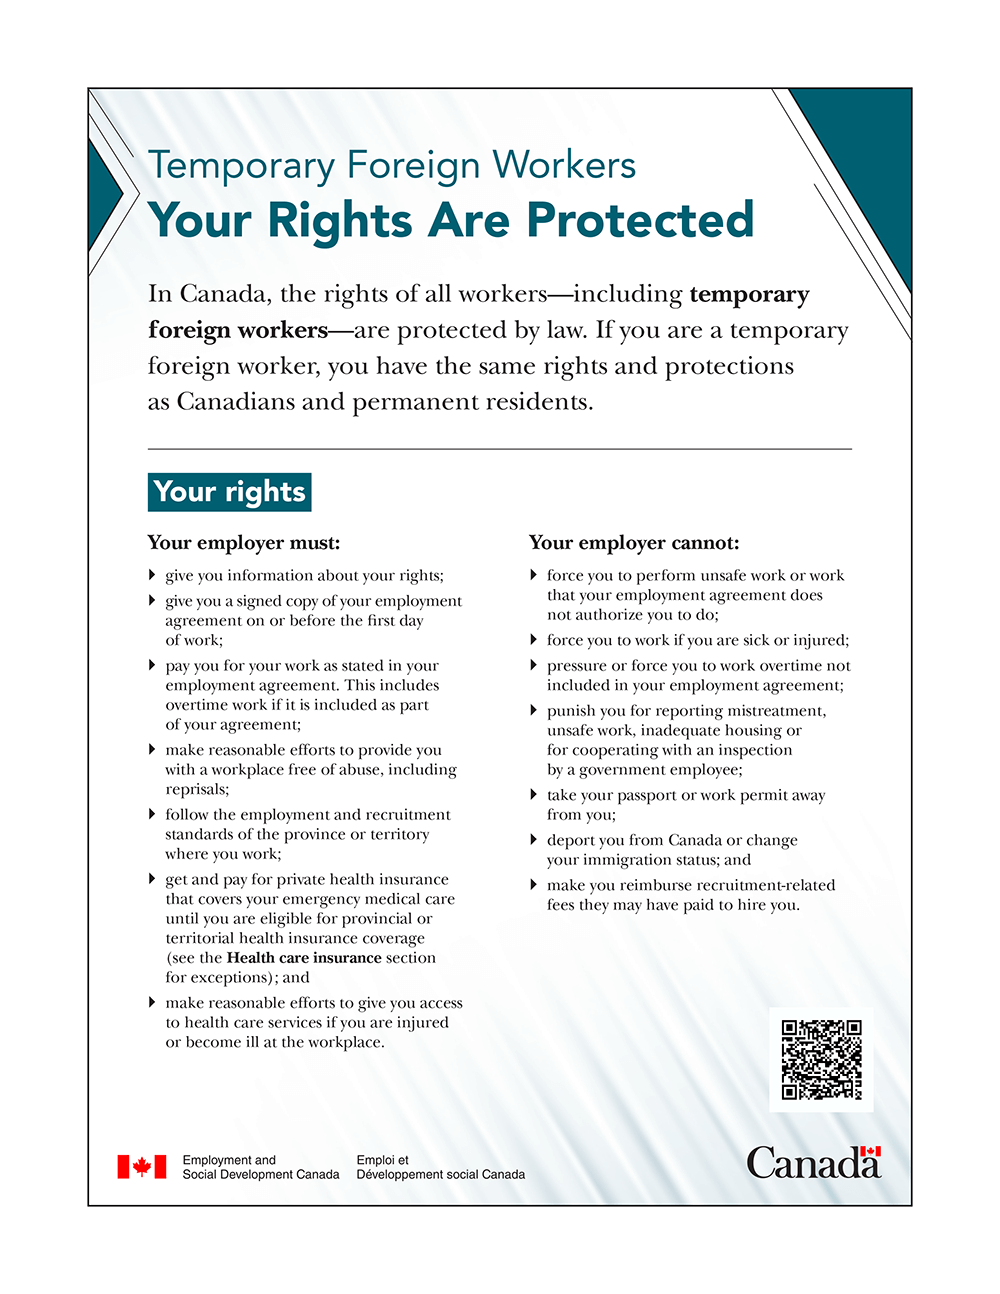 EN-Guide-TFWYourRightsAreProtected